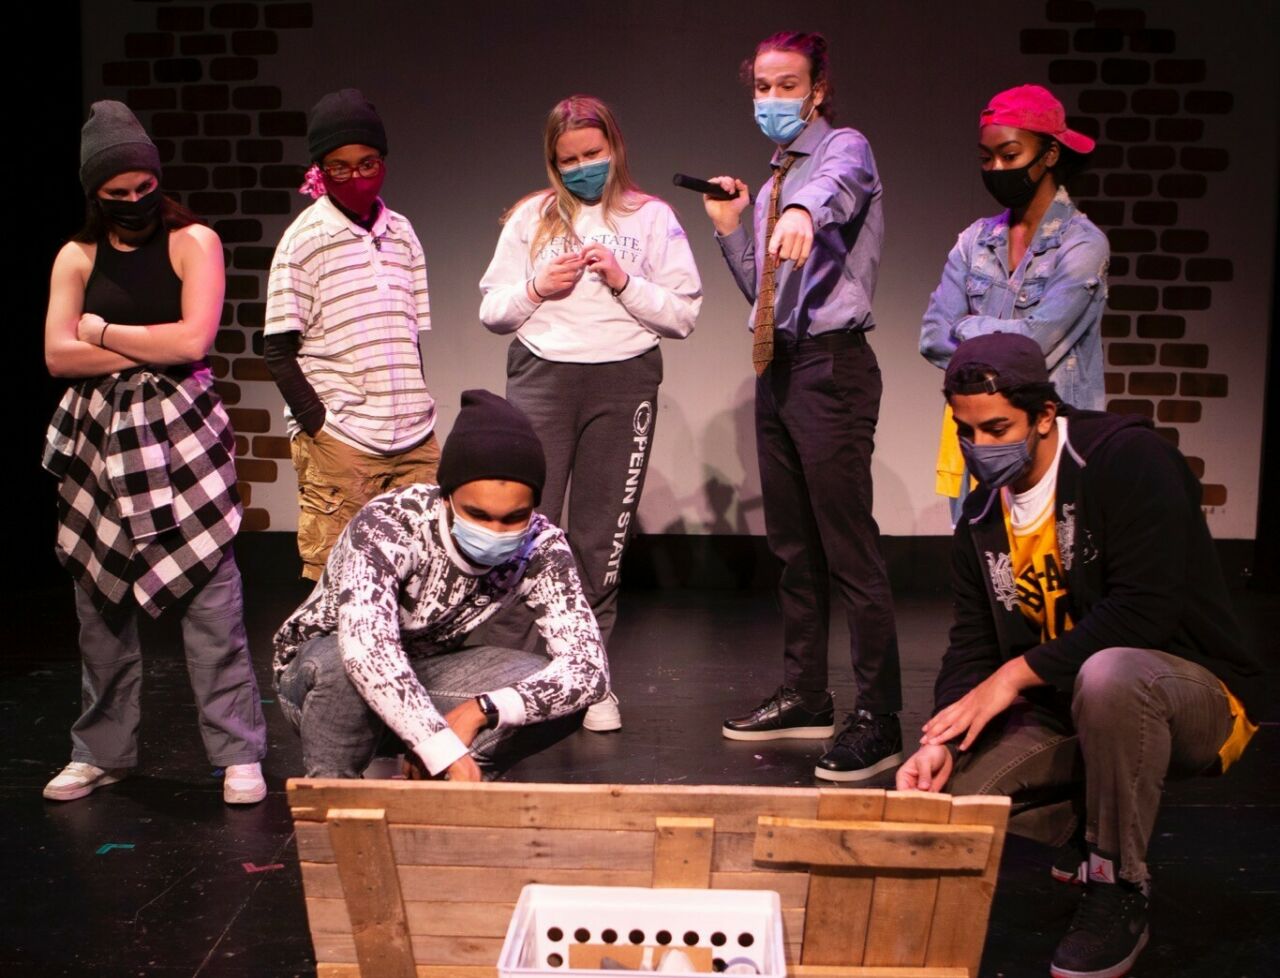 A group of seven diverse student actors huddled around and pointing at a wooden sign, the face of which is not visible to the viewer.